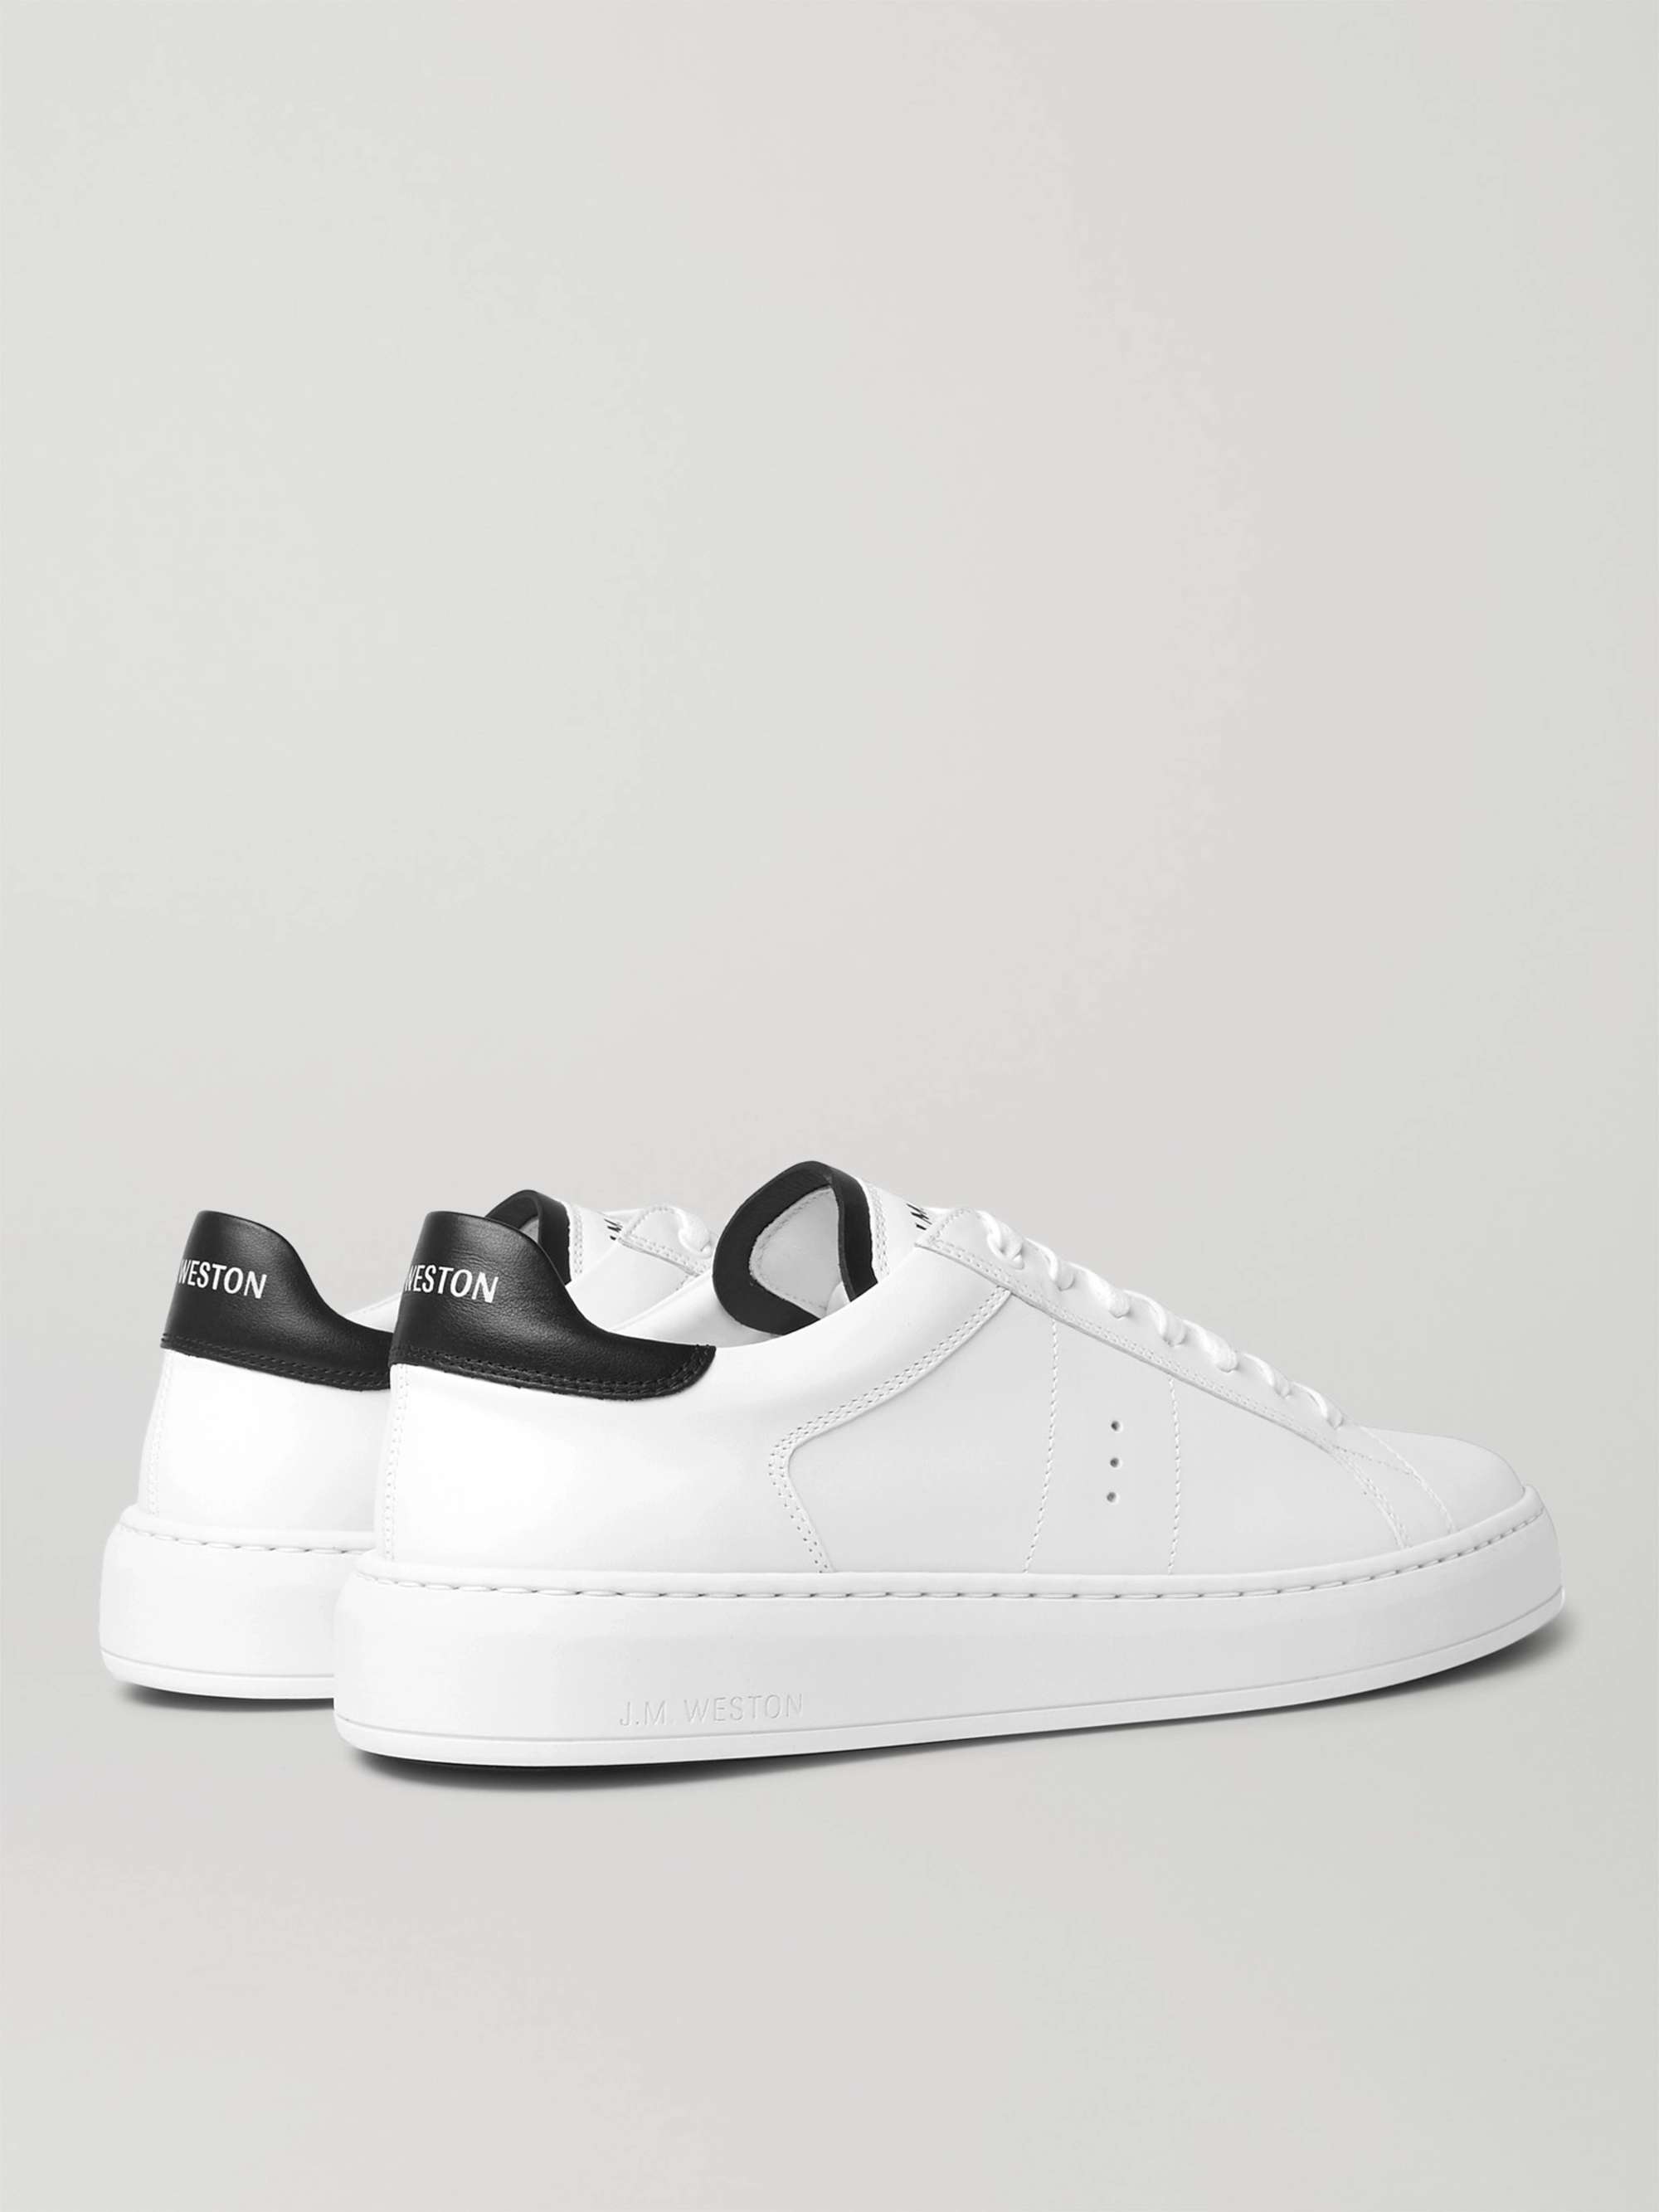 J.M. WESTON Basket on Time Leather Sneakers